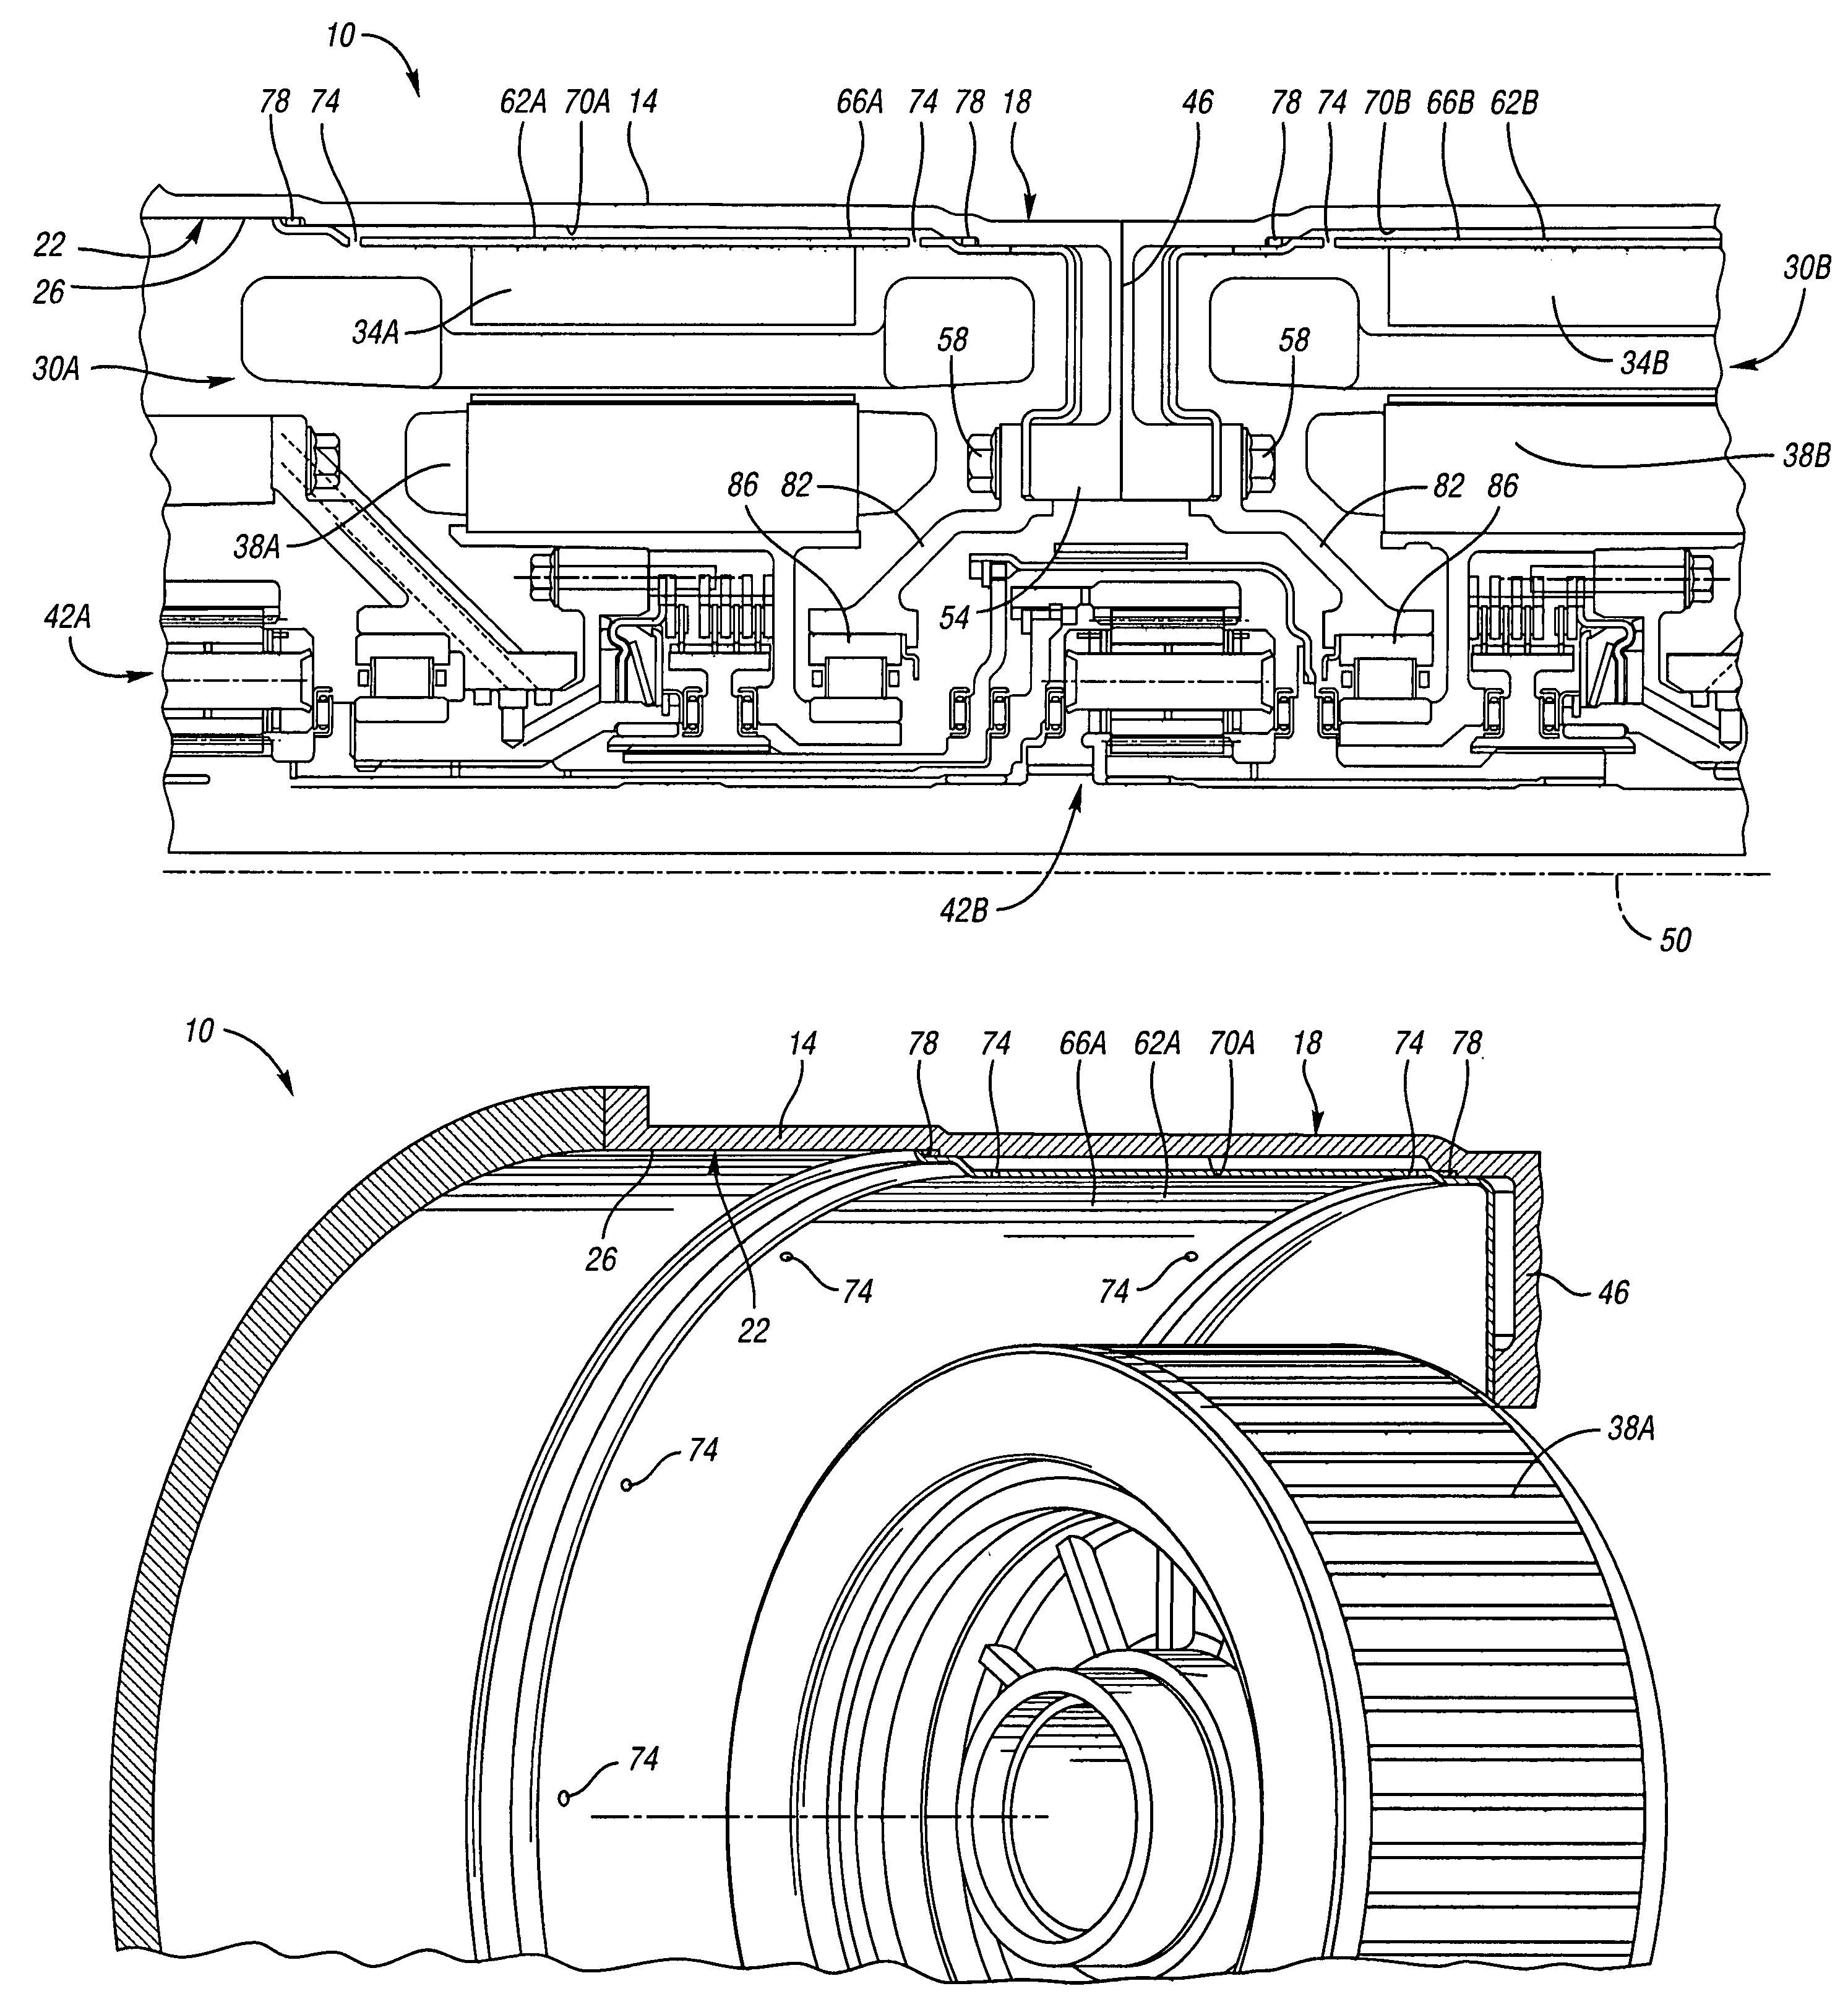 Electrically variable transmission